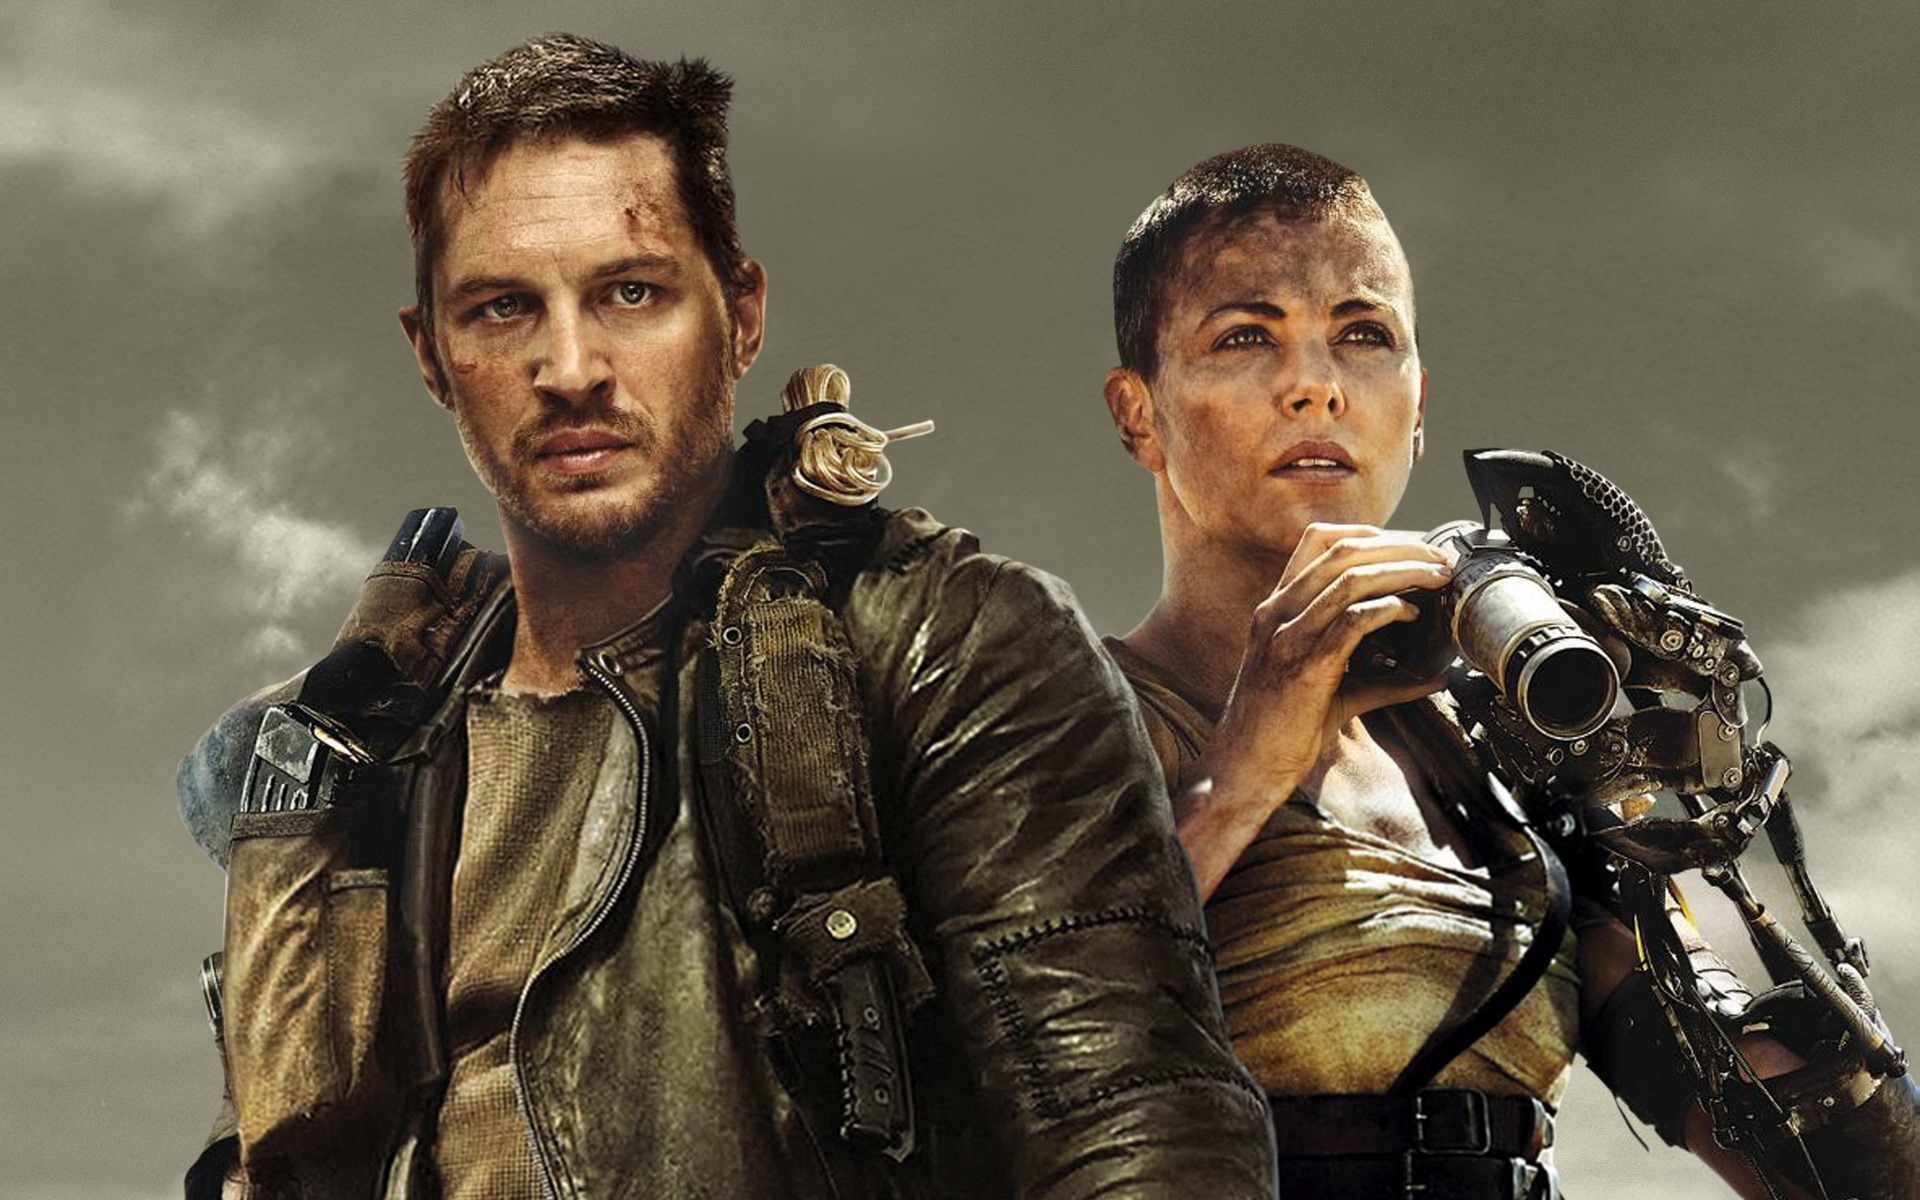 Mad Max: Fury Road, HD movie wallpapers #42 - 1920x1200